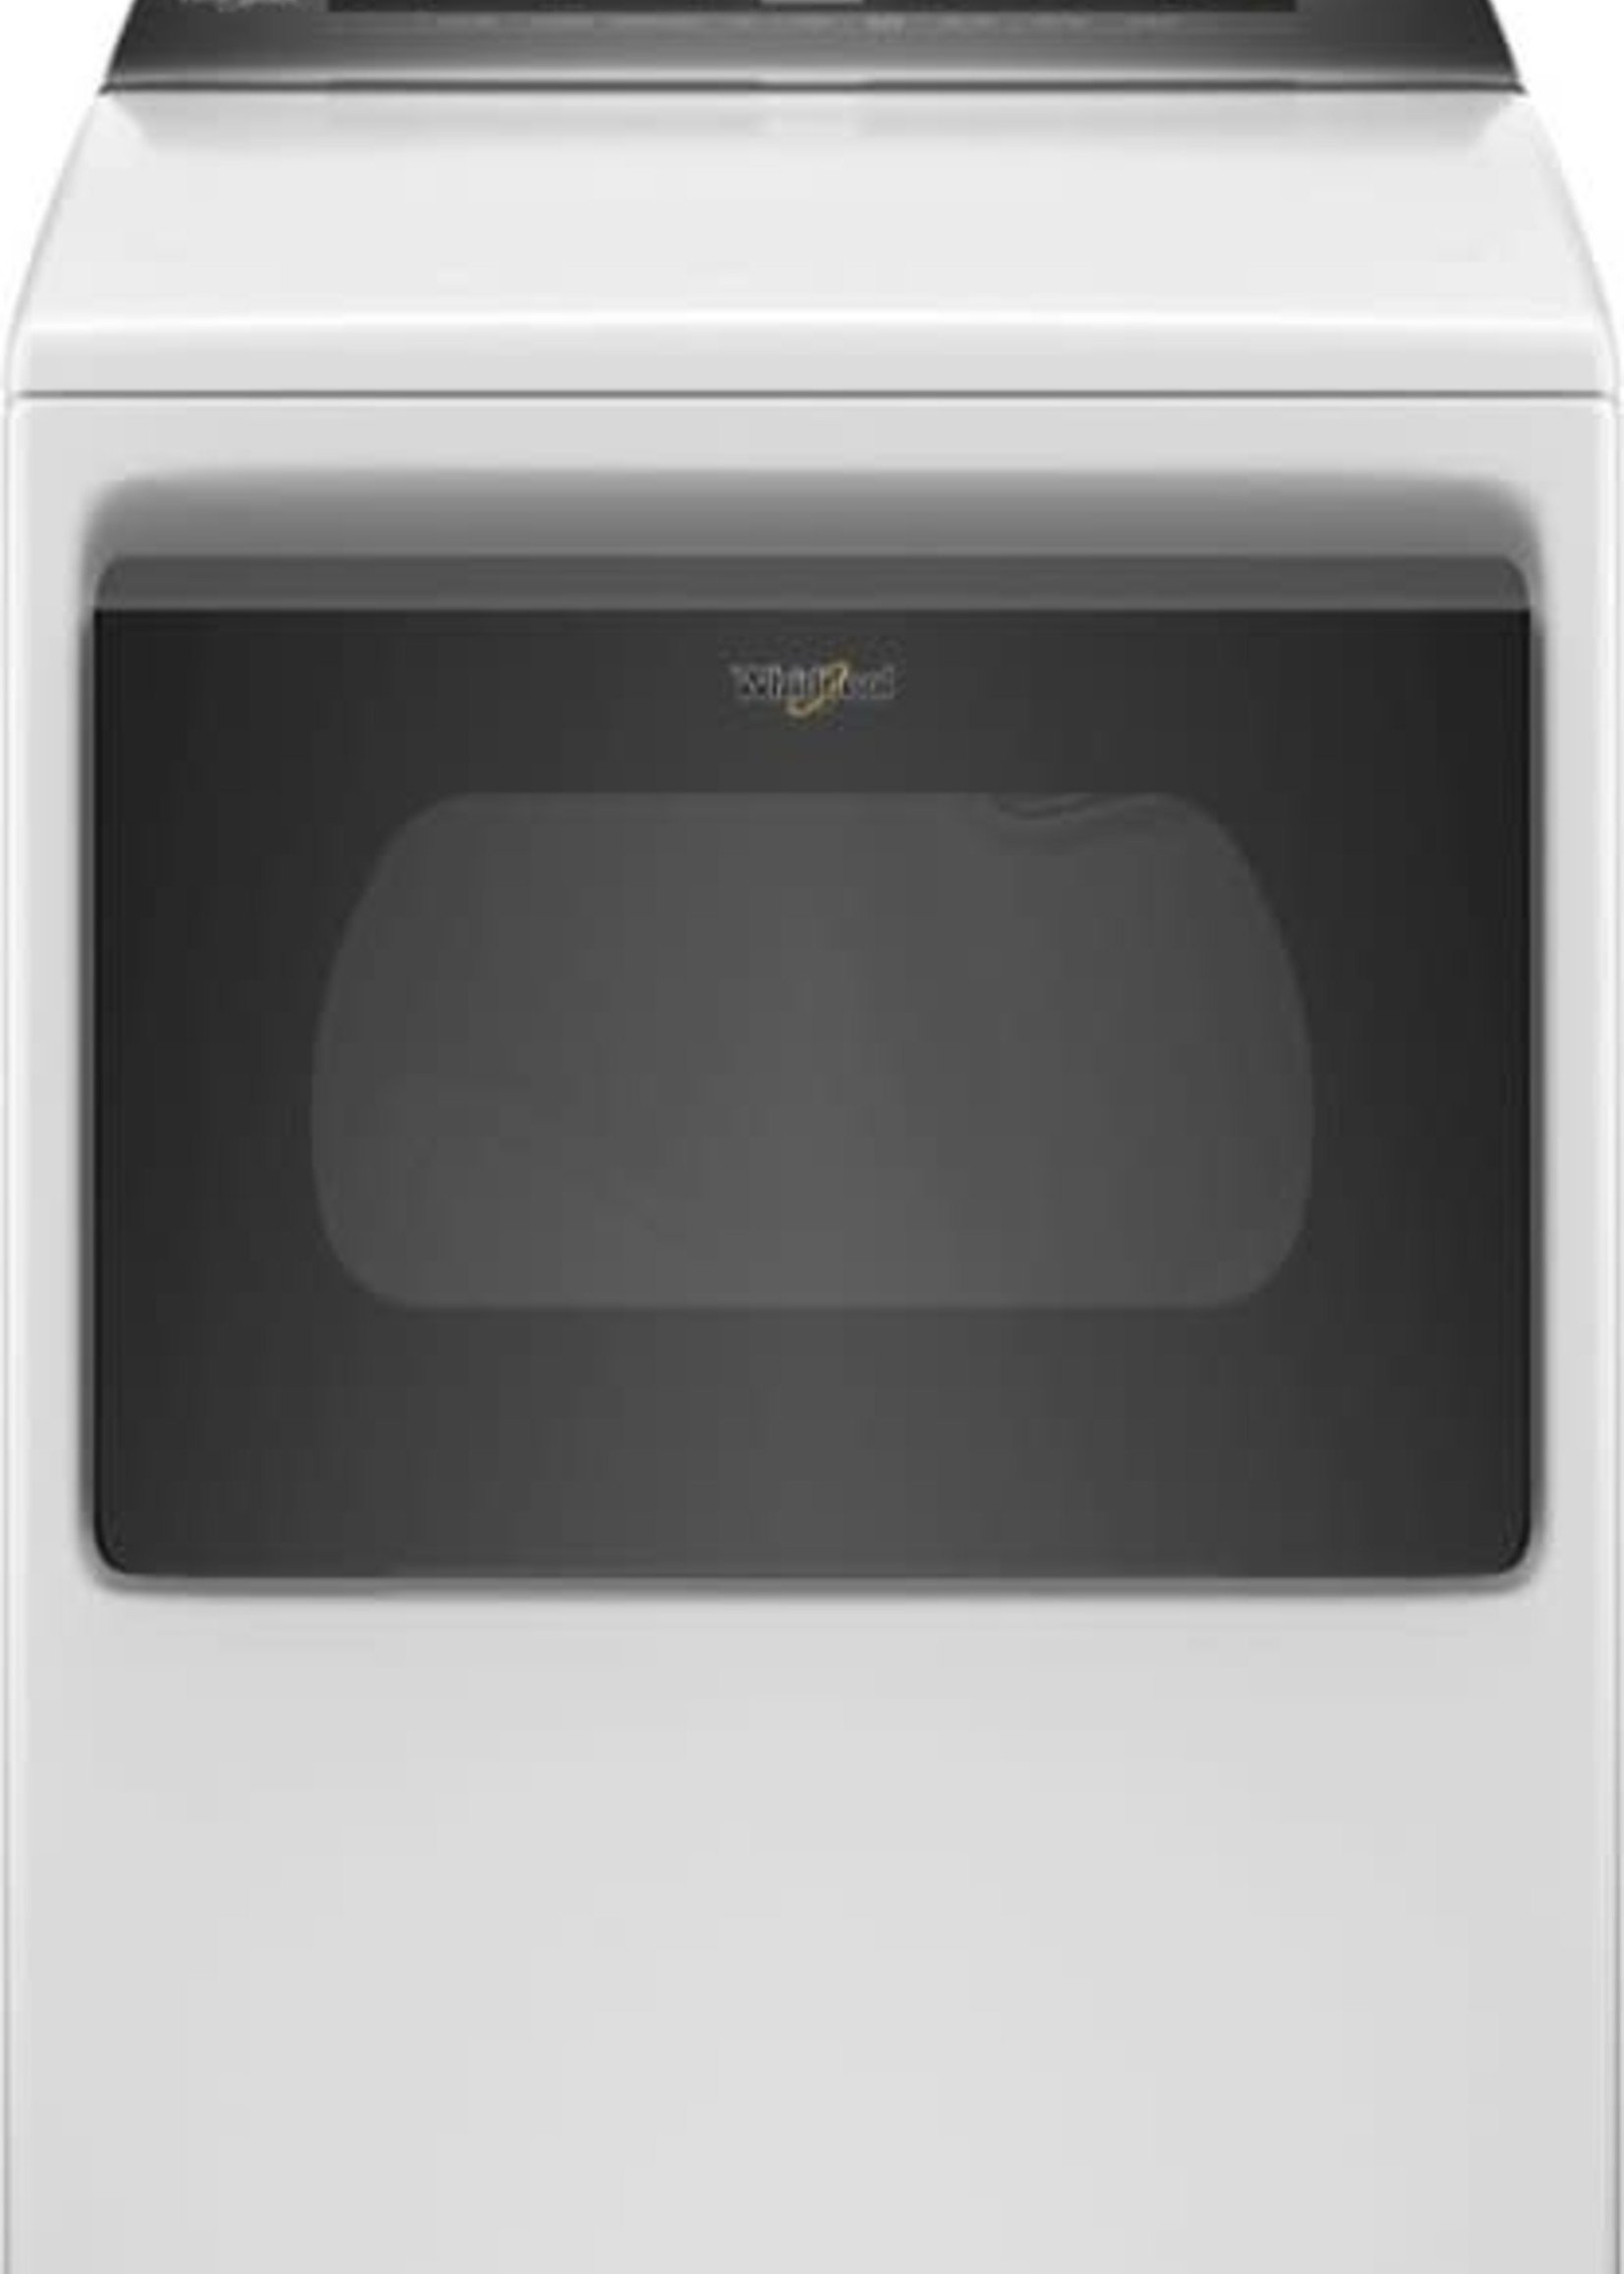 Whirlpool *Whirlpool  WED5100HW  7.4 cu. ft. White Front Load Electric Dryer with AccuDry System